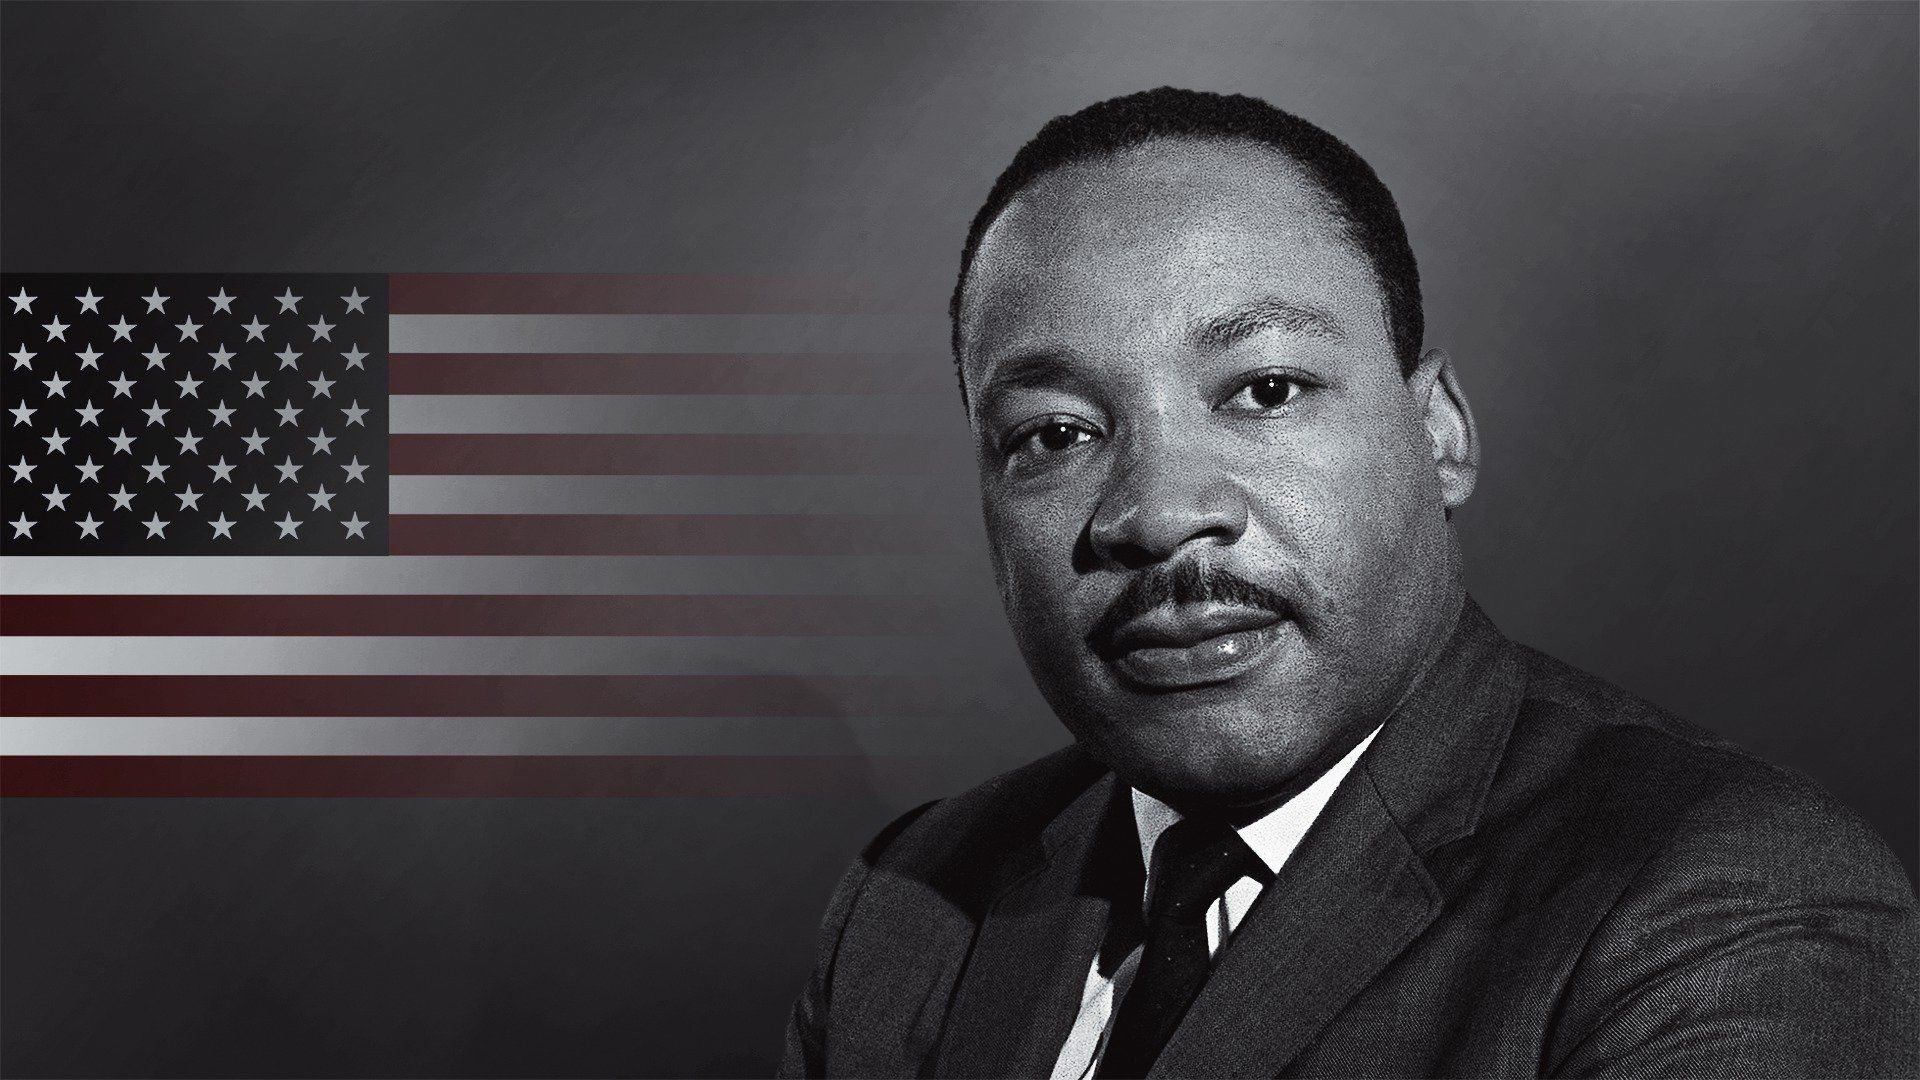 Free download Honoring Martin Luther King Jr [1920x1080] for your Desktop, Mobile & Tablet. Explore Martin Luther King Jr. Day 2020 Wallpaper. Martin Luther King Jr. Day 2020 Wallpaper